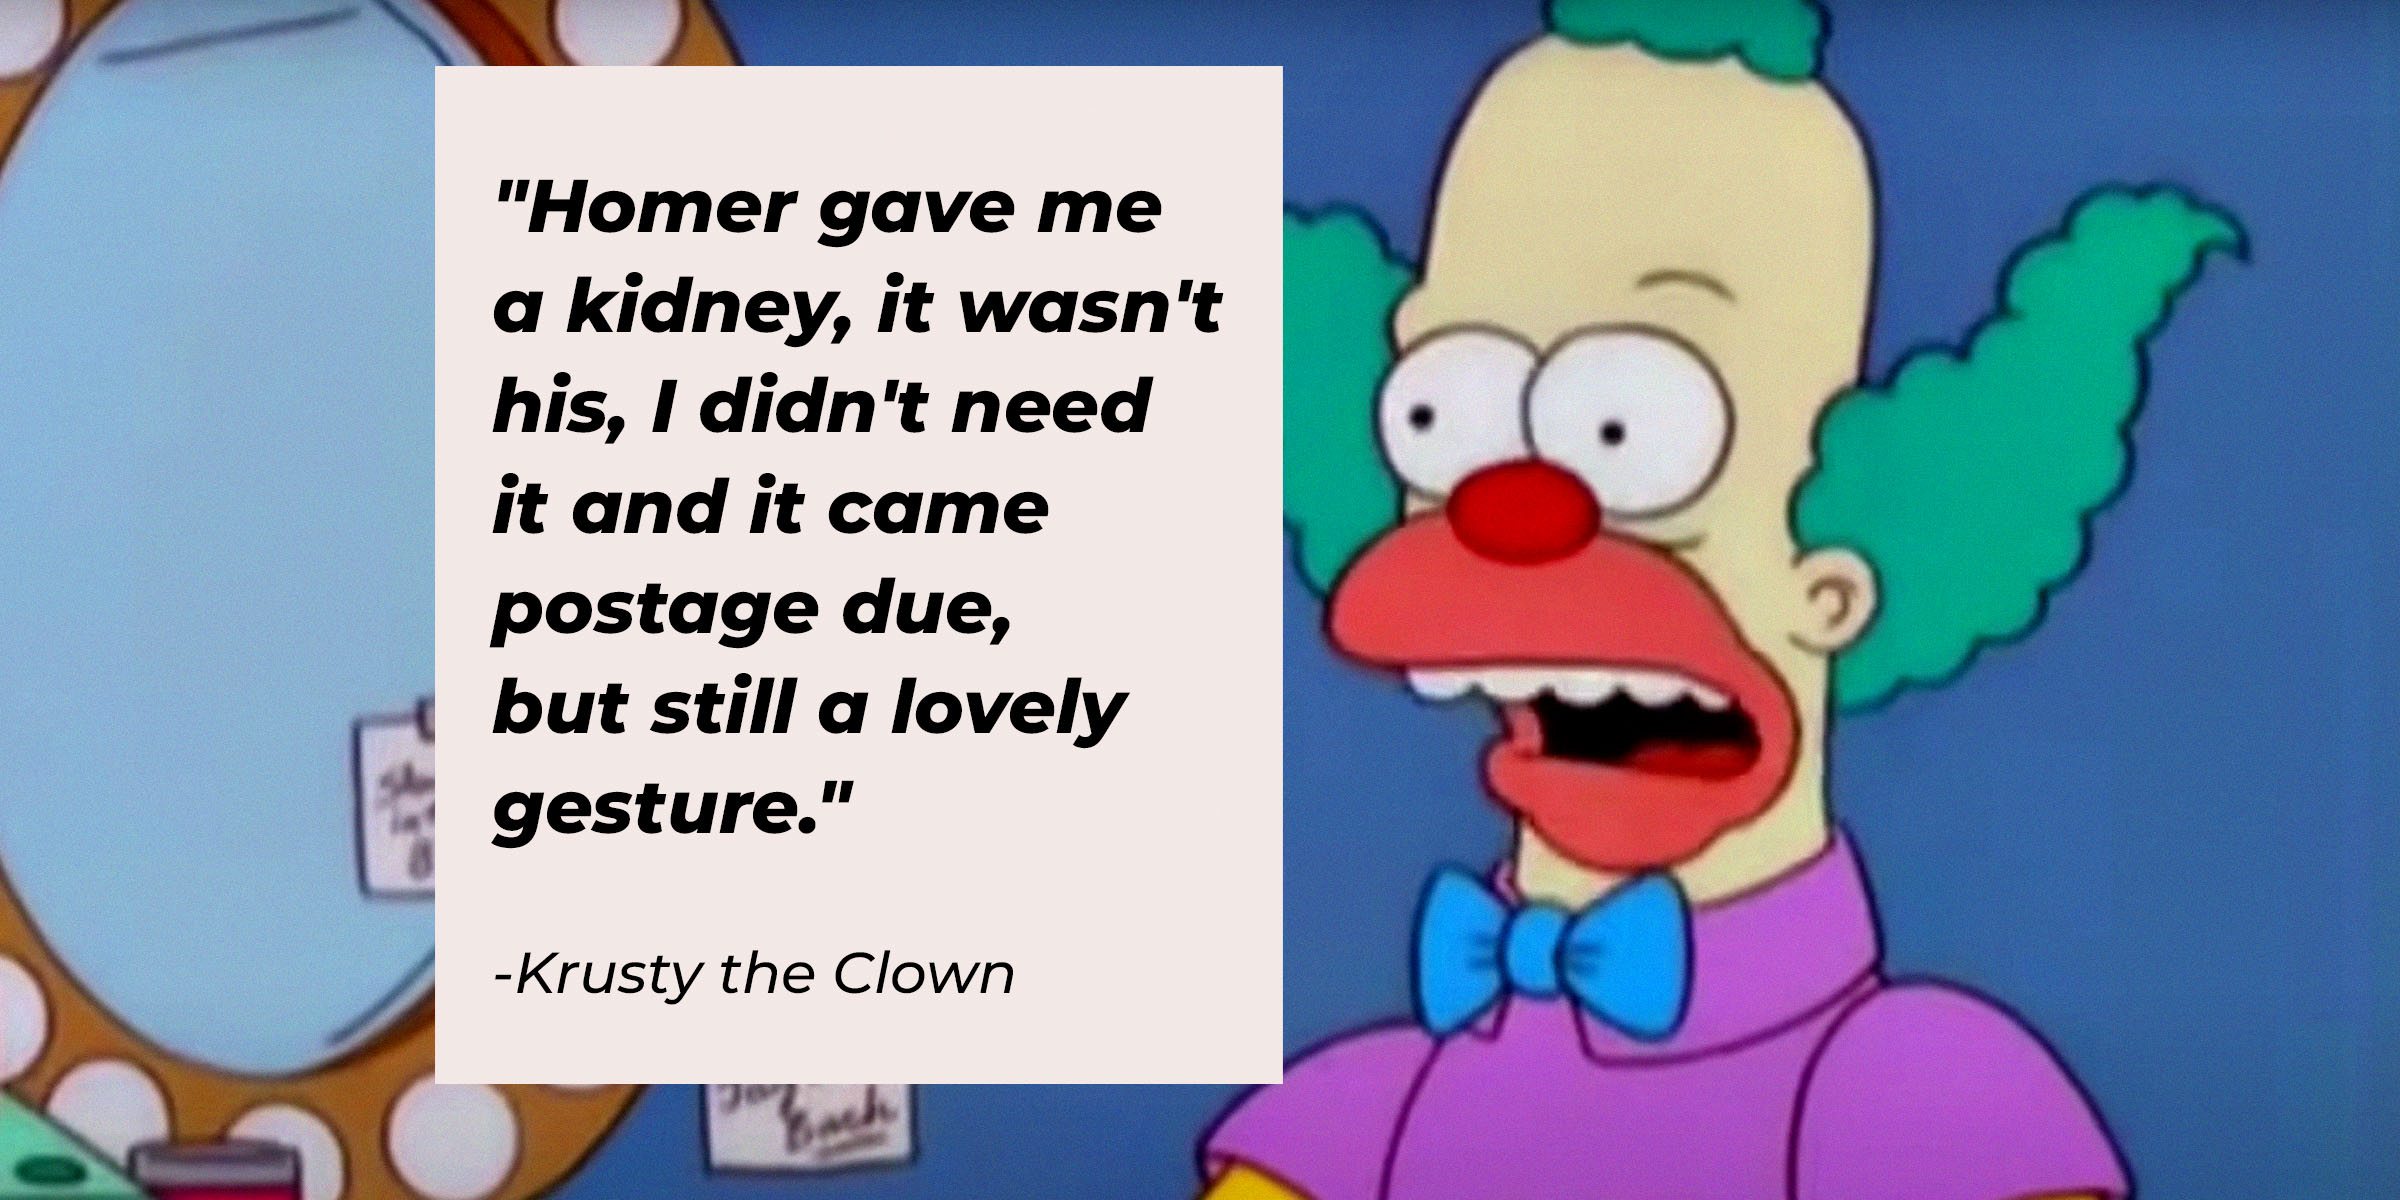 Krust the Clown's quote: "Homer gave me a kidney, it wasn't his, I didn't need it and it came postage due, but still a lovely gesture" | Source: Facebook.com/TheSimpsons